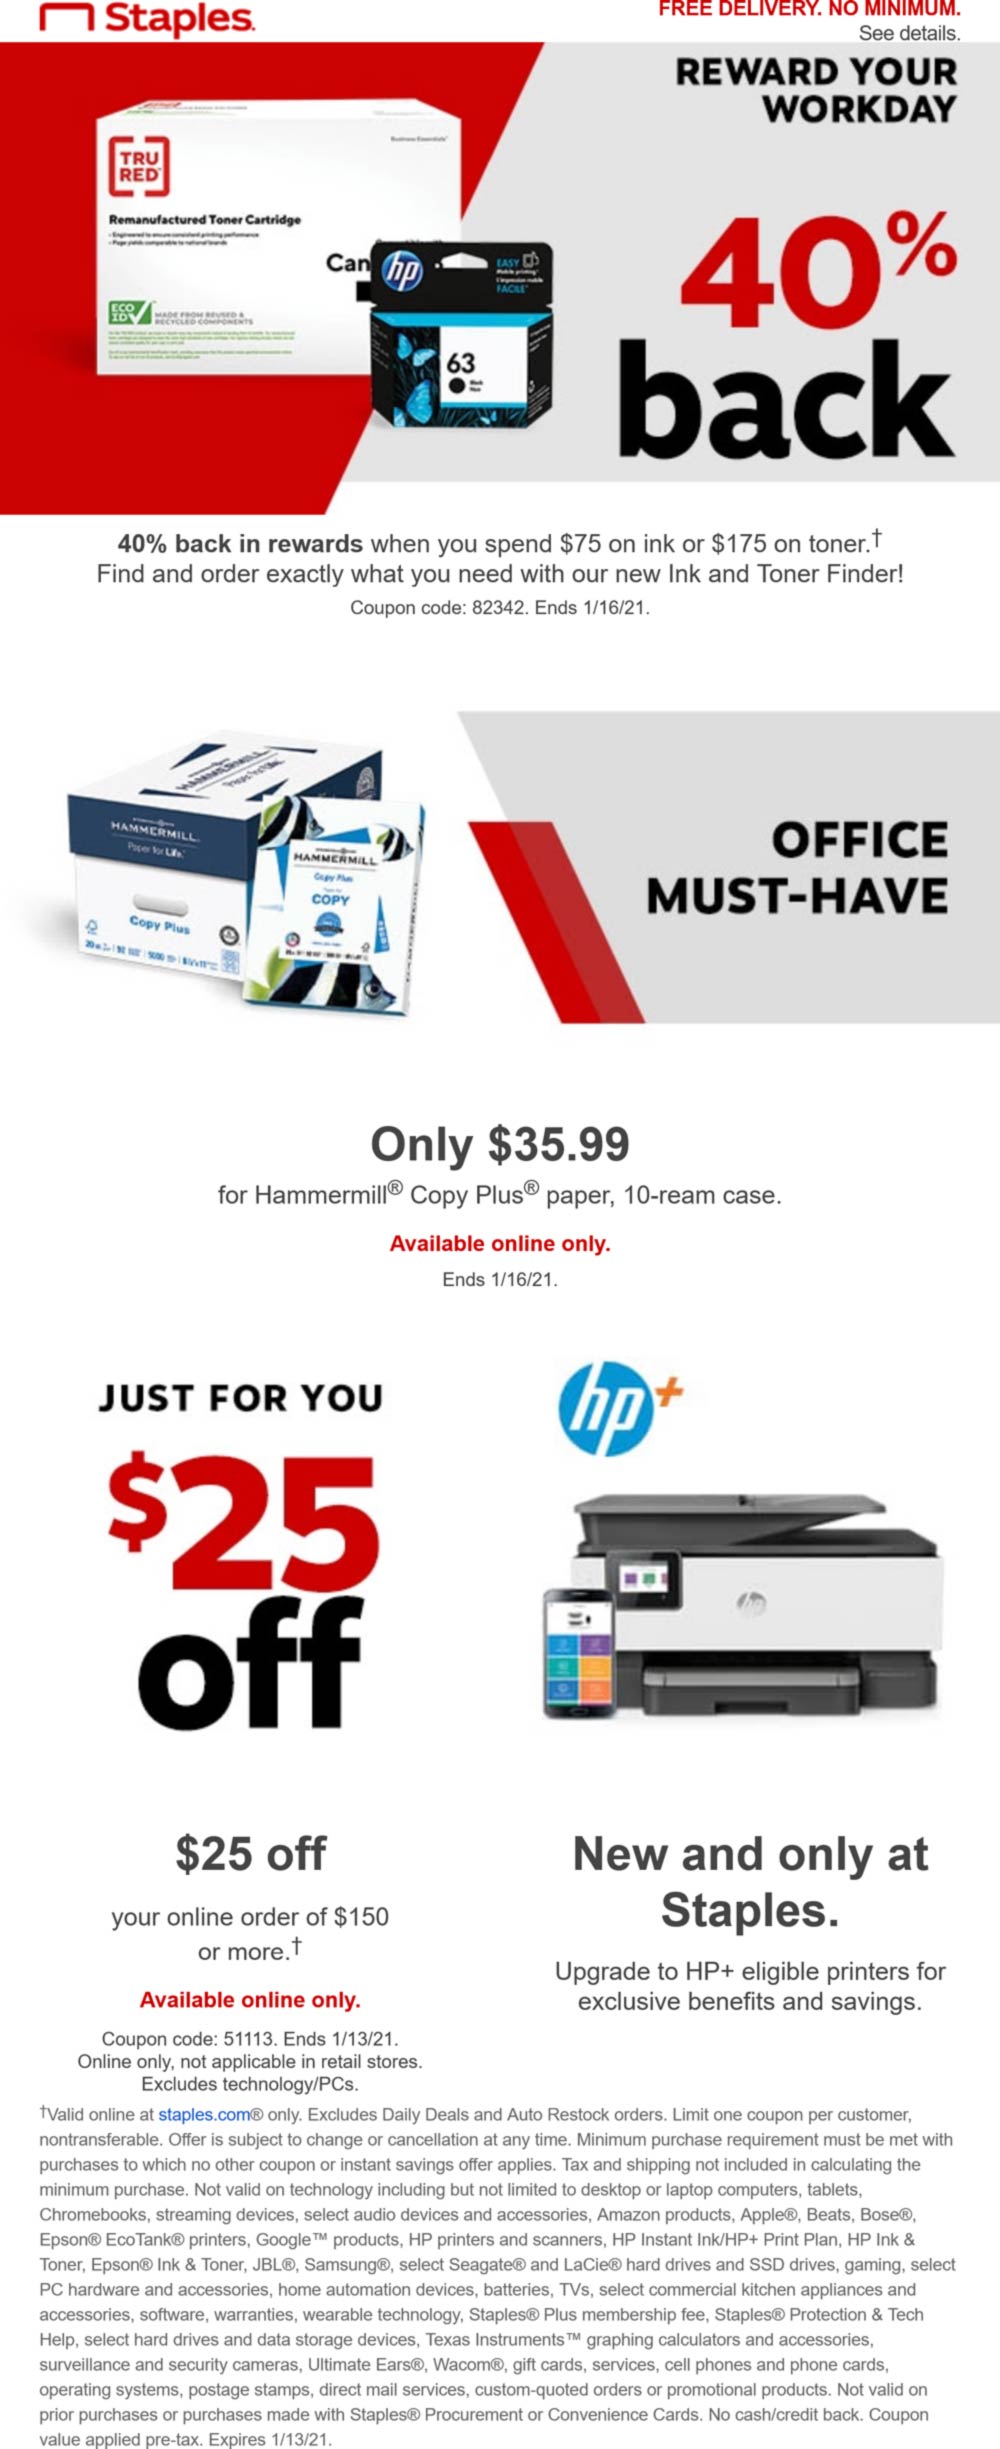 Staples stores Coupon  $25 off $150 today online at Staples via promo code 51113 #staples 